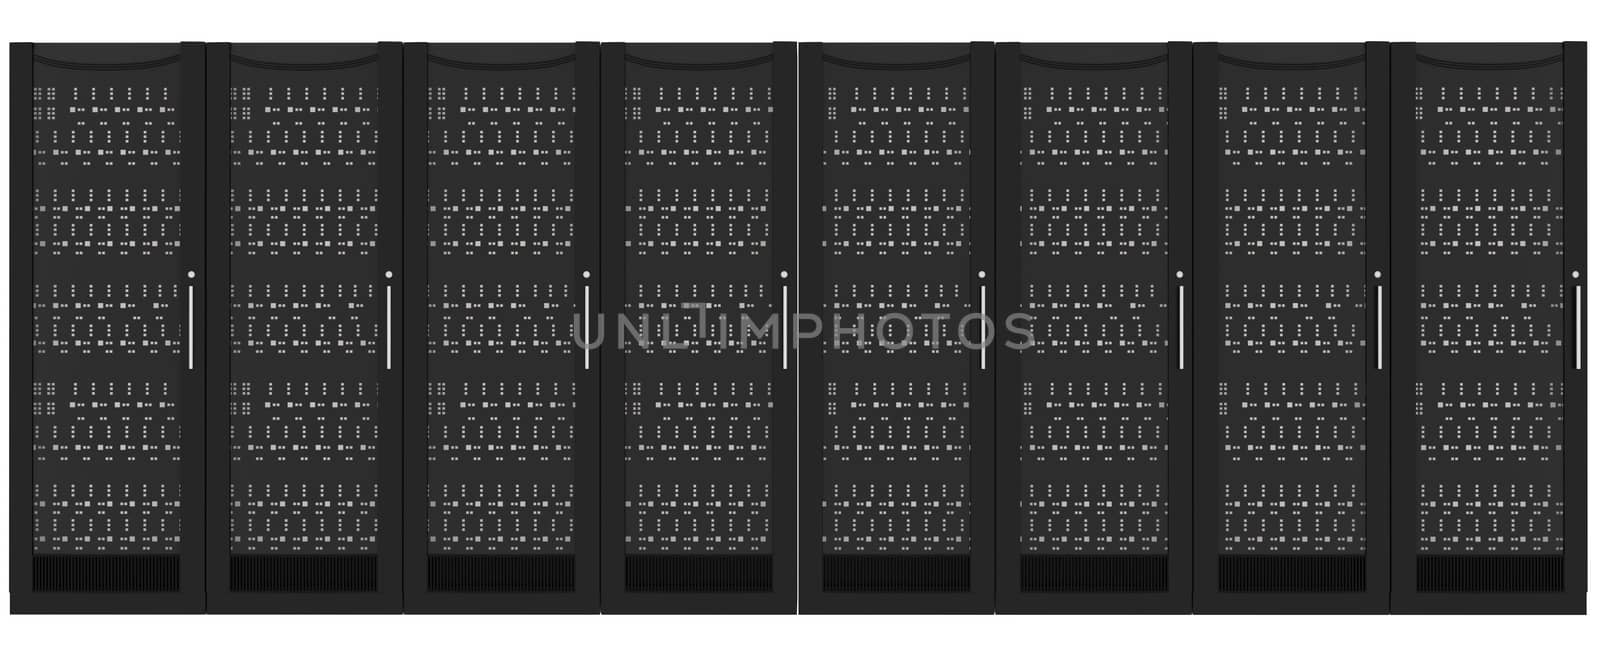 Set of metal lockers on isolated white background, front view